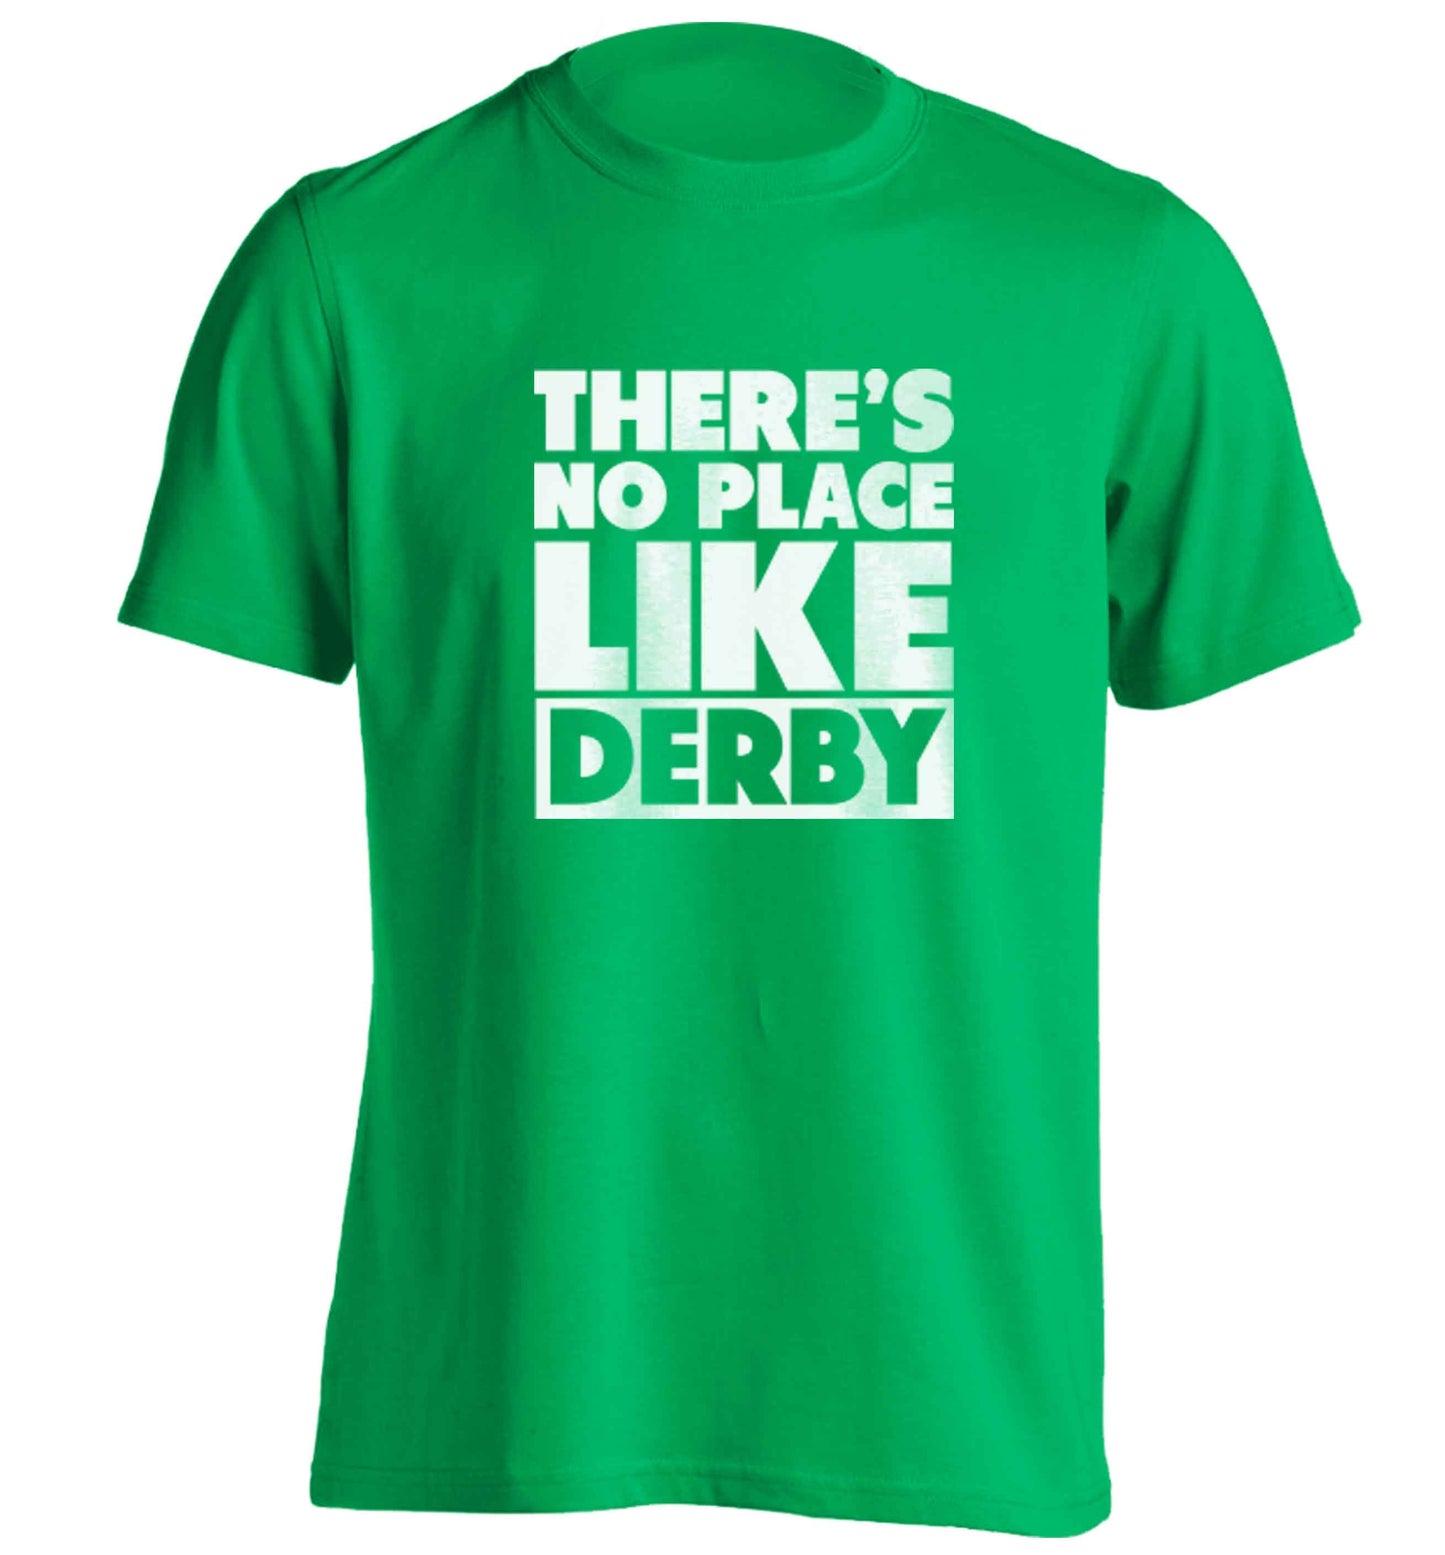 There's no place like Derby adults unisex green Tshirt 2XL